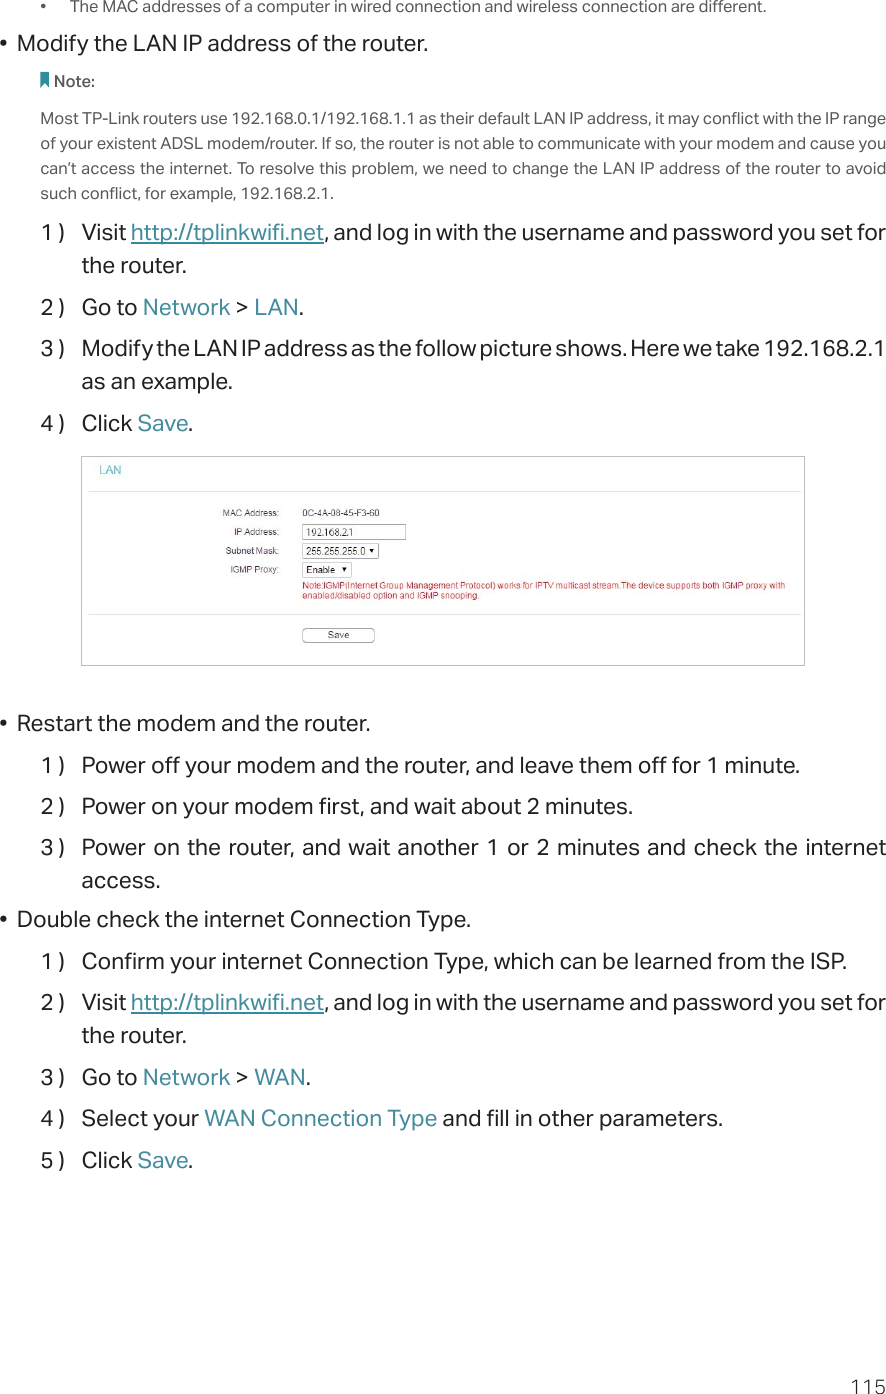 115•  The MAC addresses of a computer in wired connection and wireless connection are different.•  Modify the LAN IP address of the router.Note: Most TP-Link routers use 192.168.0.1/192.168.1.1 as their default LAN IP address, it may conflict with the IP range of your existent ADSL modem/router. If so, the router is not able to communicate with your modem and cause you can’t access the internet. To resolve this problem, we need to change the LAN IP address of the router to avoid such conflict, for example, 192.168.2.1. 1 )  Visit http://tplinkwifi.net, and log in with the username and password you set for the router.2 )  Go to Network &gt; LAN.3 )  Modify the LAN IP address as the follow picture shows. Here we take 192.168.2.1 as an example.4 )  Click Save.•  Restart the modem and the router.1 )  Power off your modem and the router, and leave them off for 1 minute.2 )  Power on your modem first, and wait about 2 minutes.3 )  Power on the router, and wait another 1 or 2 minutes and check the internet access.•  Double check the internet Connection Type.1 )  Confirm your internet Connection Type, which can be learned from the ISP.2 )  Visit http://tplinkwifi.net, and log in with the username and password you set for the router.3 )  Go to Network &gt; WAN.4 )  Select your WAN Connection Type and fill in other parameters.5 )  Click Save.